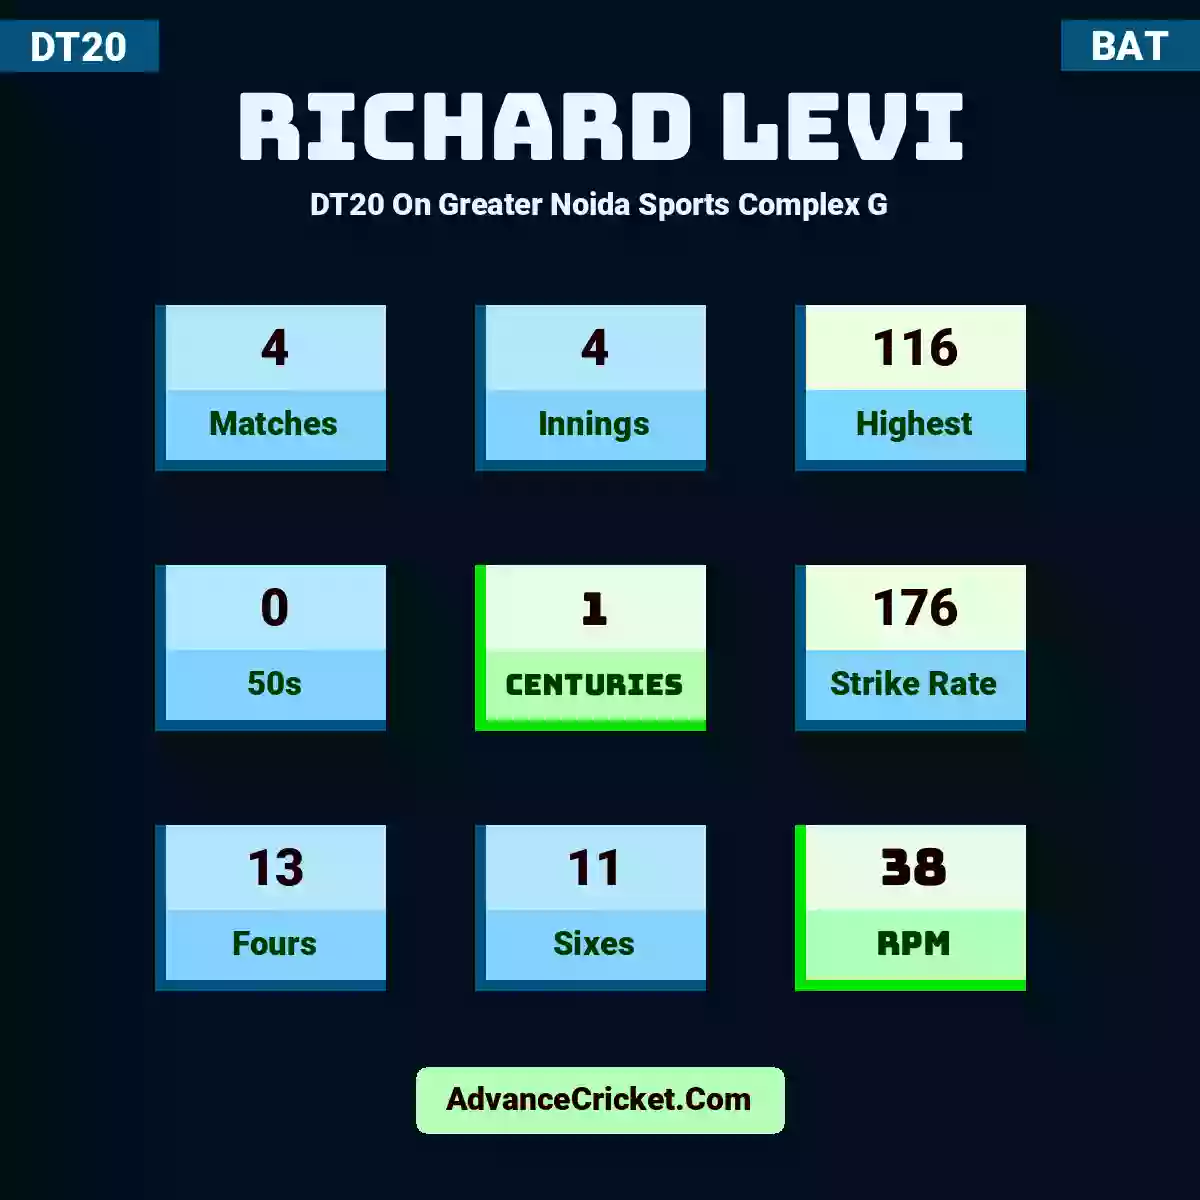 Richard Levi DT20  On Greater Noida Sports Complex G, Richard Levi played 4 matches, scored 116 runs as highest, 0 half-centuries, and 1 centuries, with a strike rate of 176. R.Levi hit 13 fours and 11 sixes, with an RPM of 38.